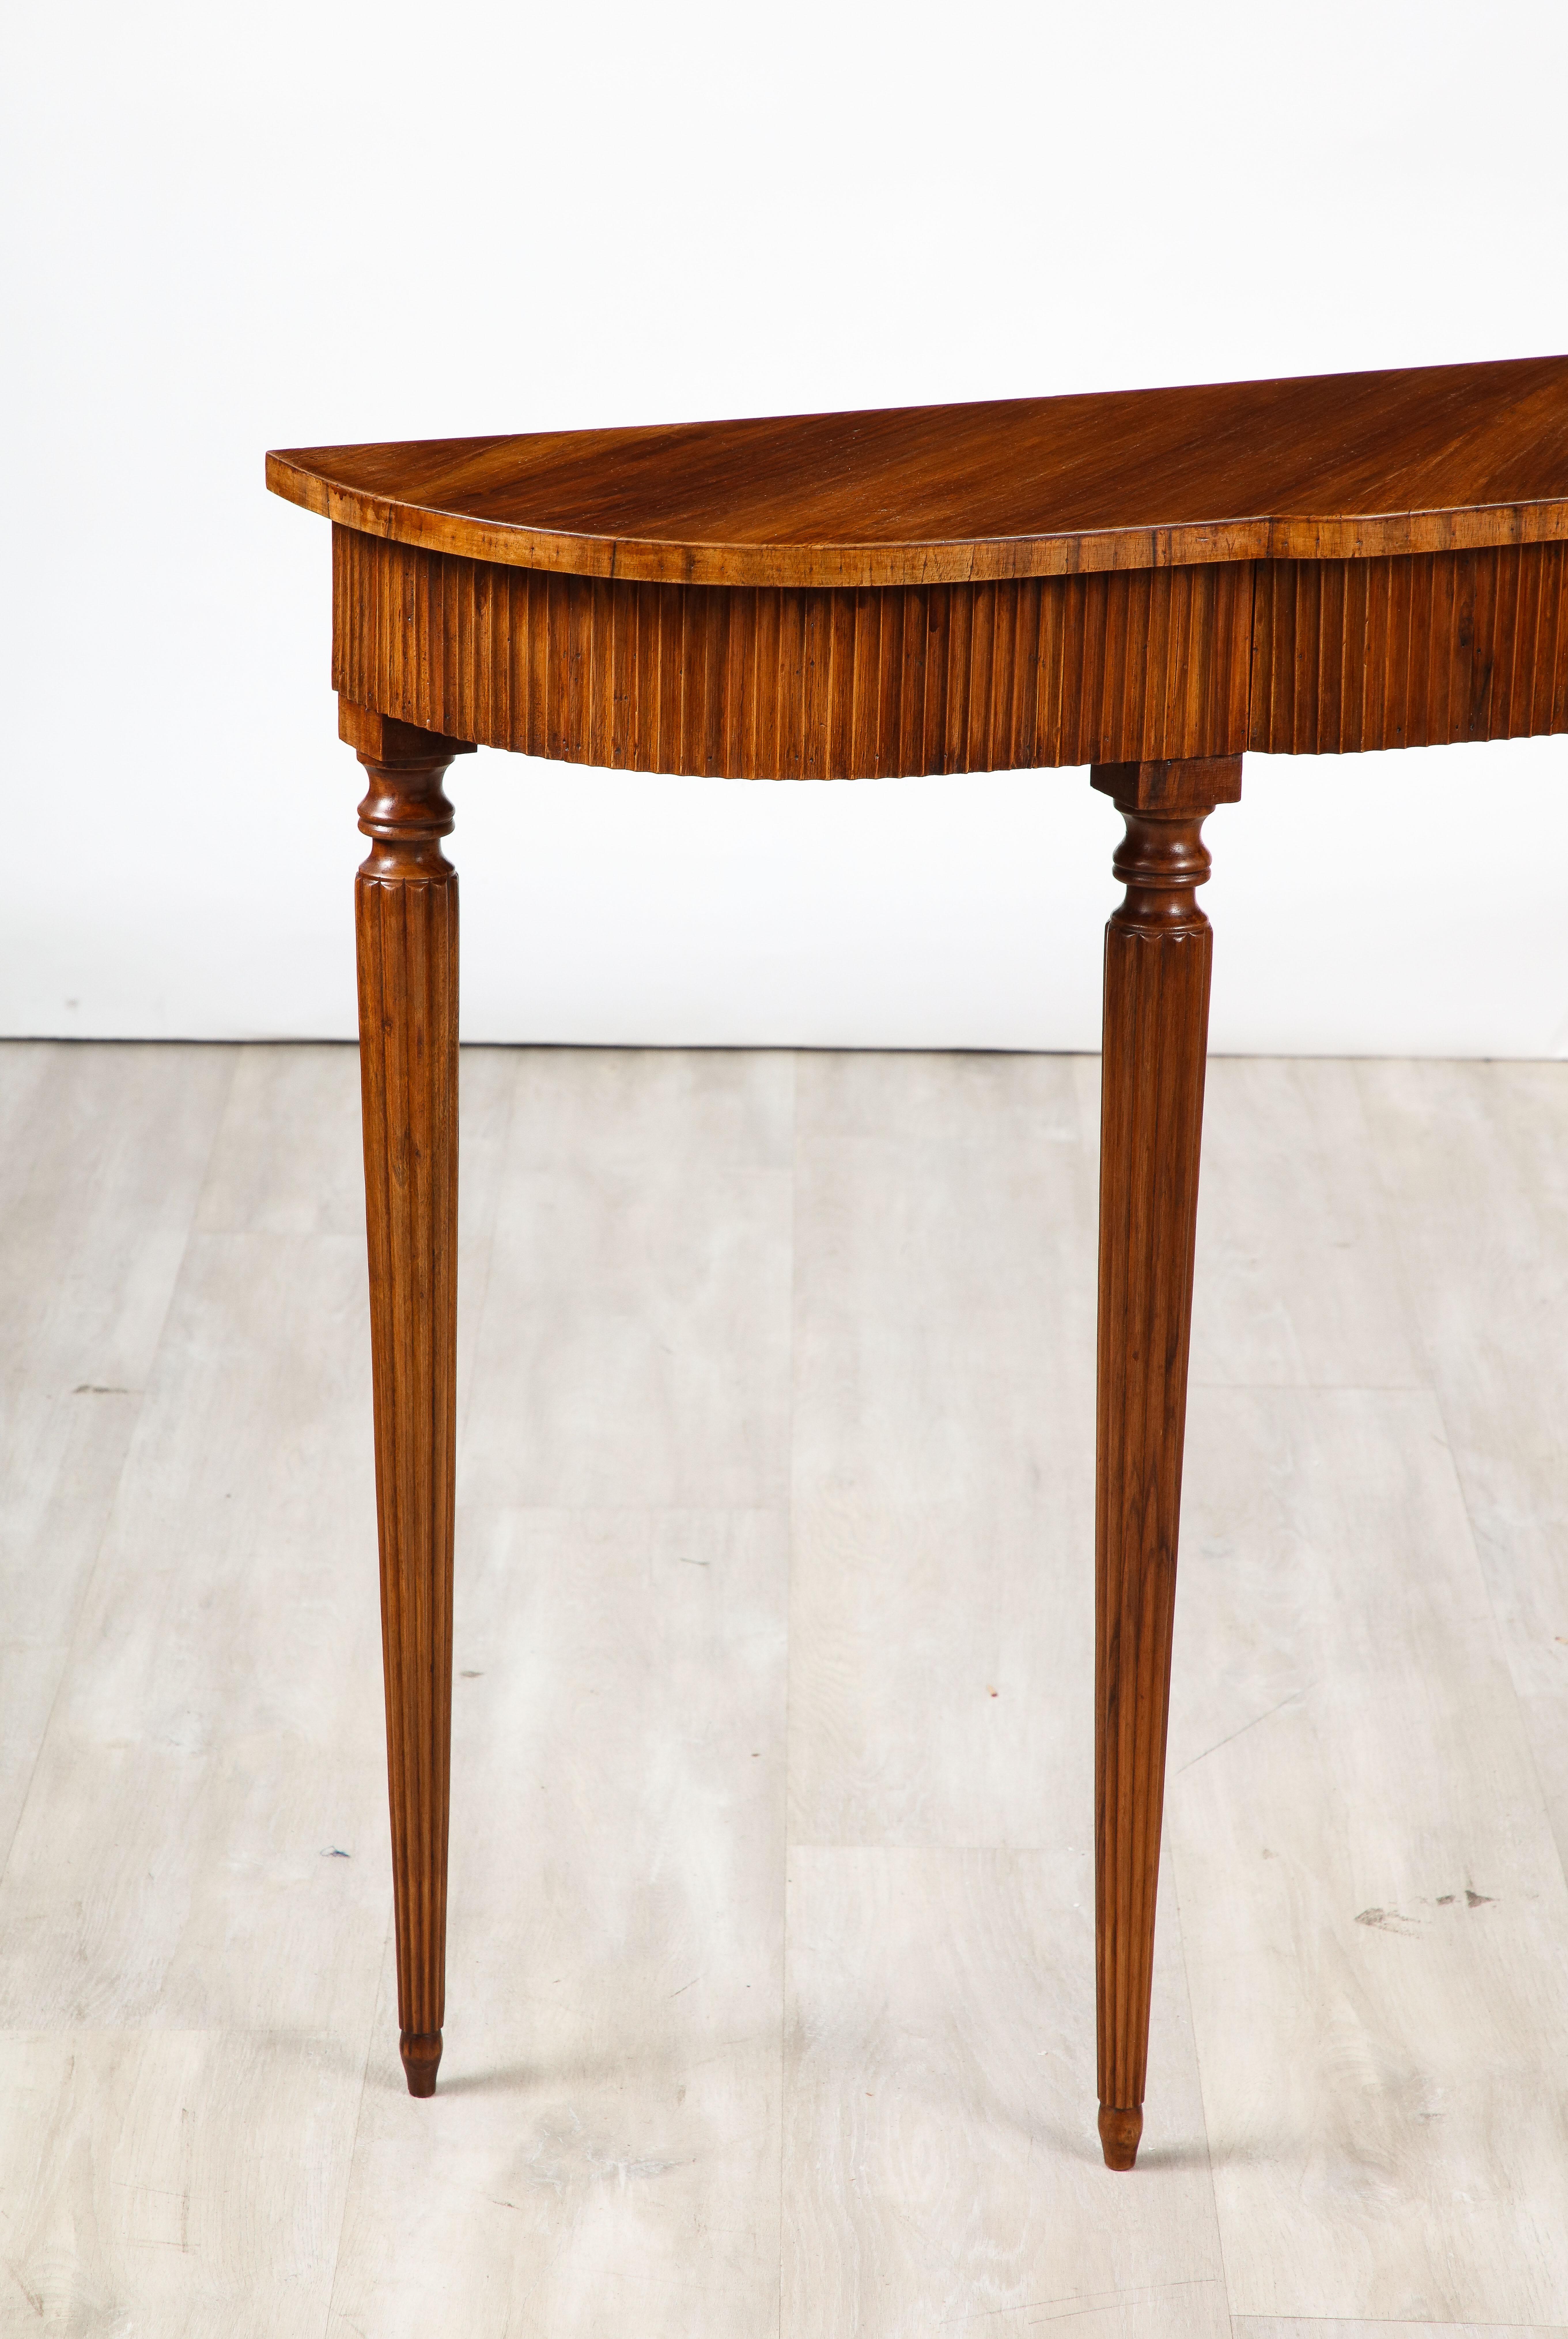 Italian Walnut Carved Console Table with Two Drawers, Italy circa 1930 For Sale 4